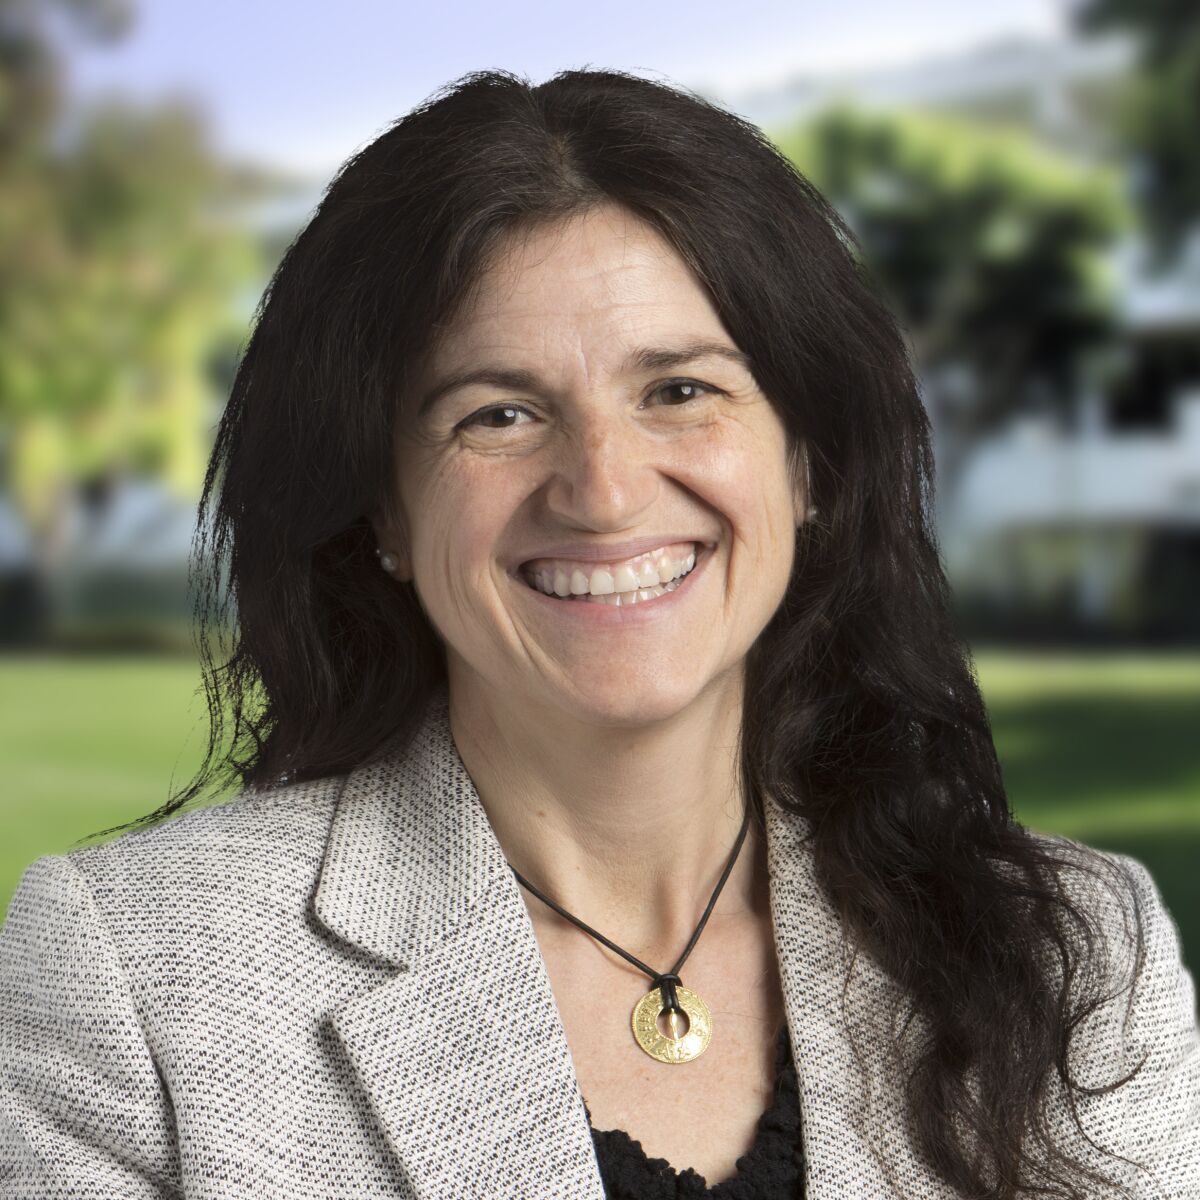 Scripps Research will present “Frontiers in Alcohol Addiction Science and Medicine” with Marisa Roberto on Aug. 10 online.